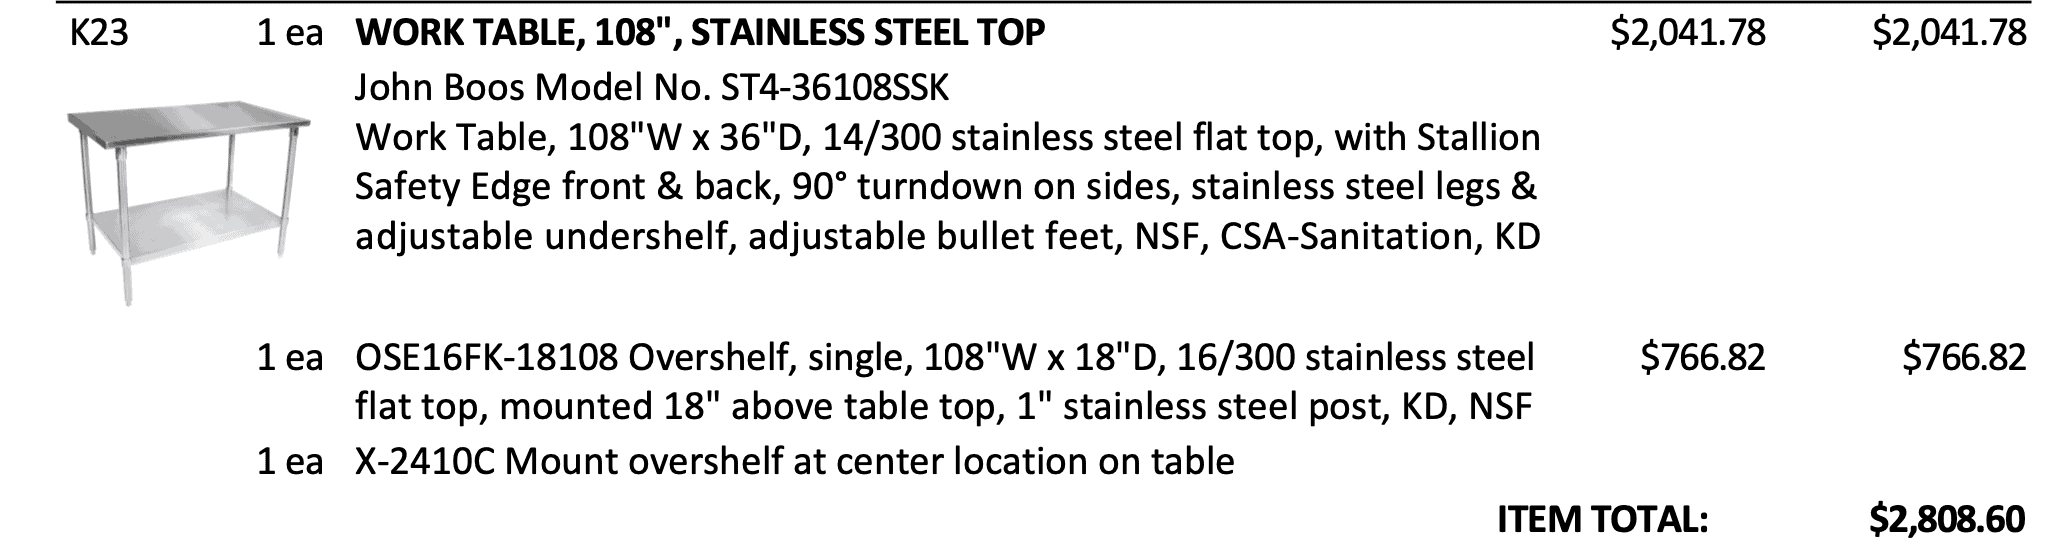 Stainless Steel Top Work Table (108)